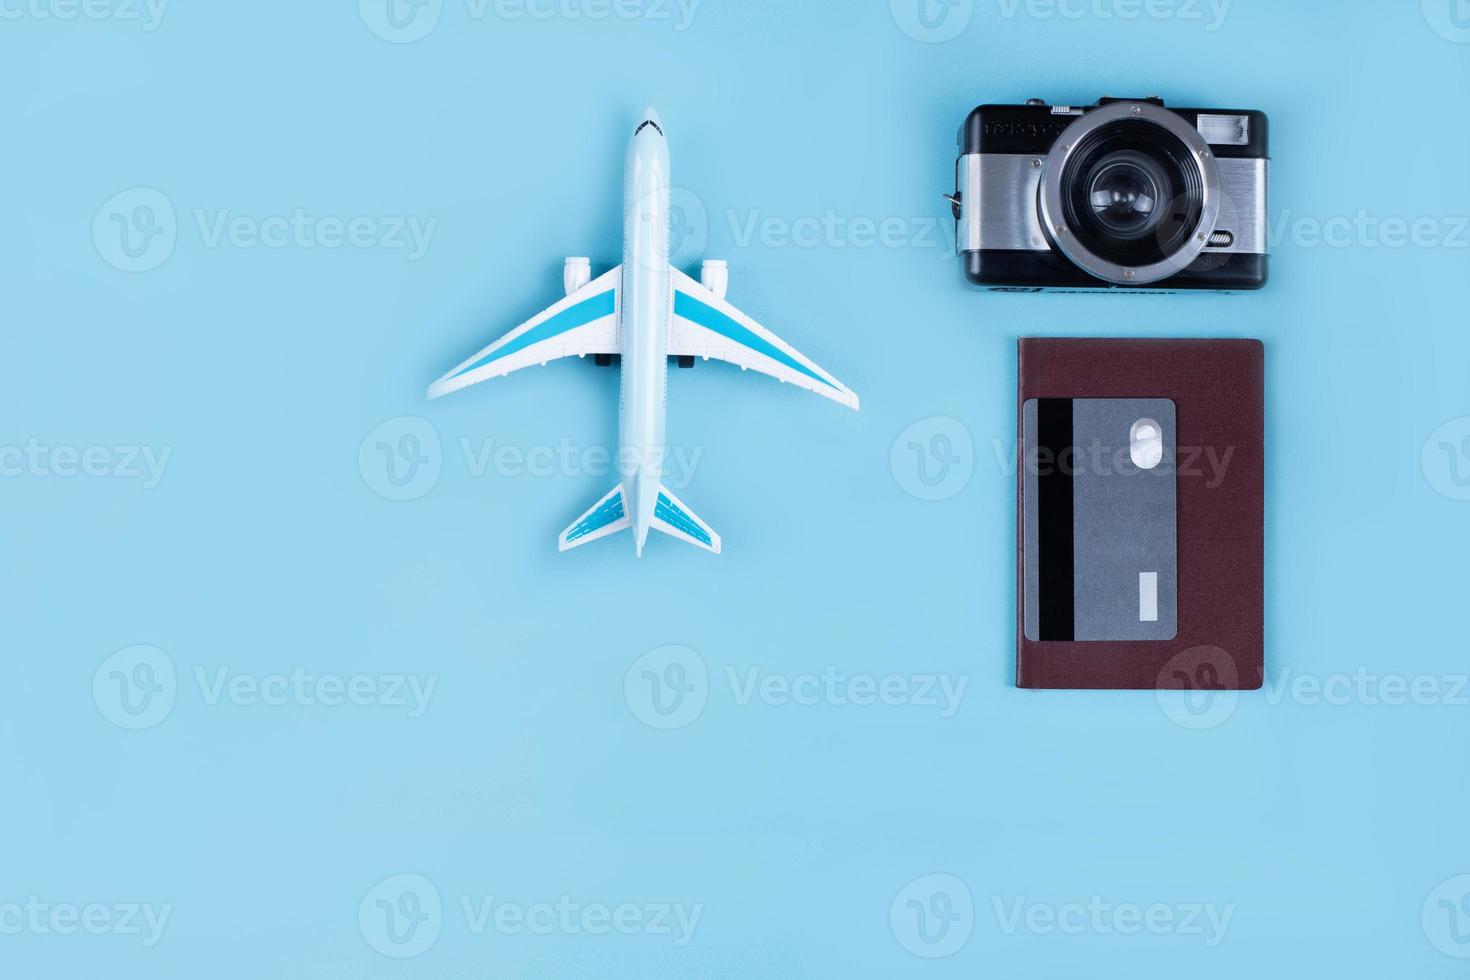 Airplane miniature as a symbol of travel. Camera and passport, travel accessories, credit card to pay for a comfortable stay. photo